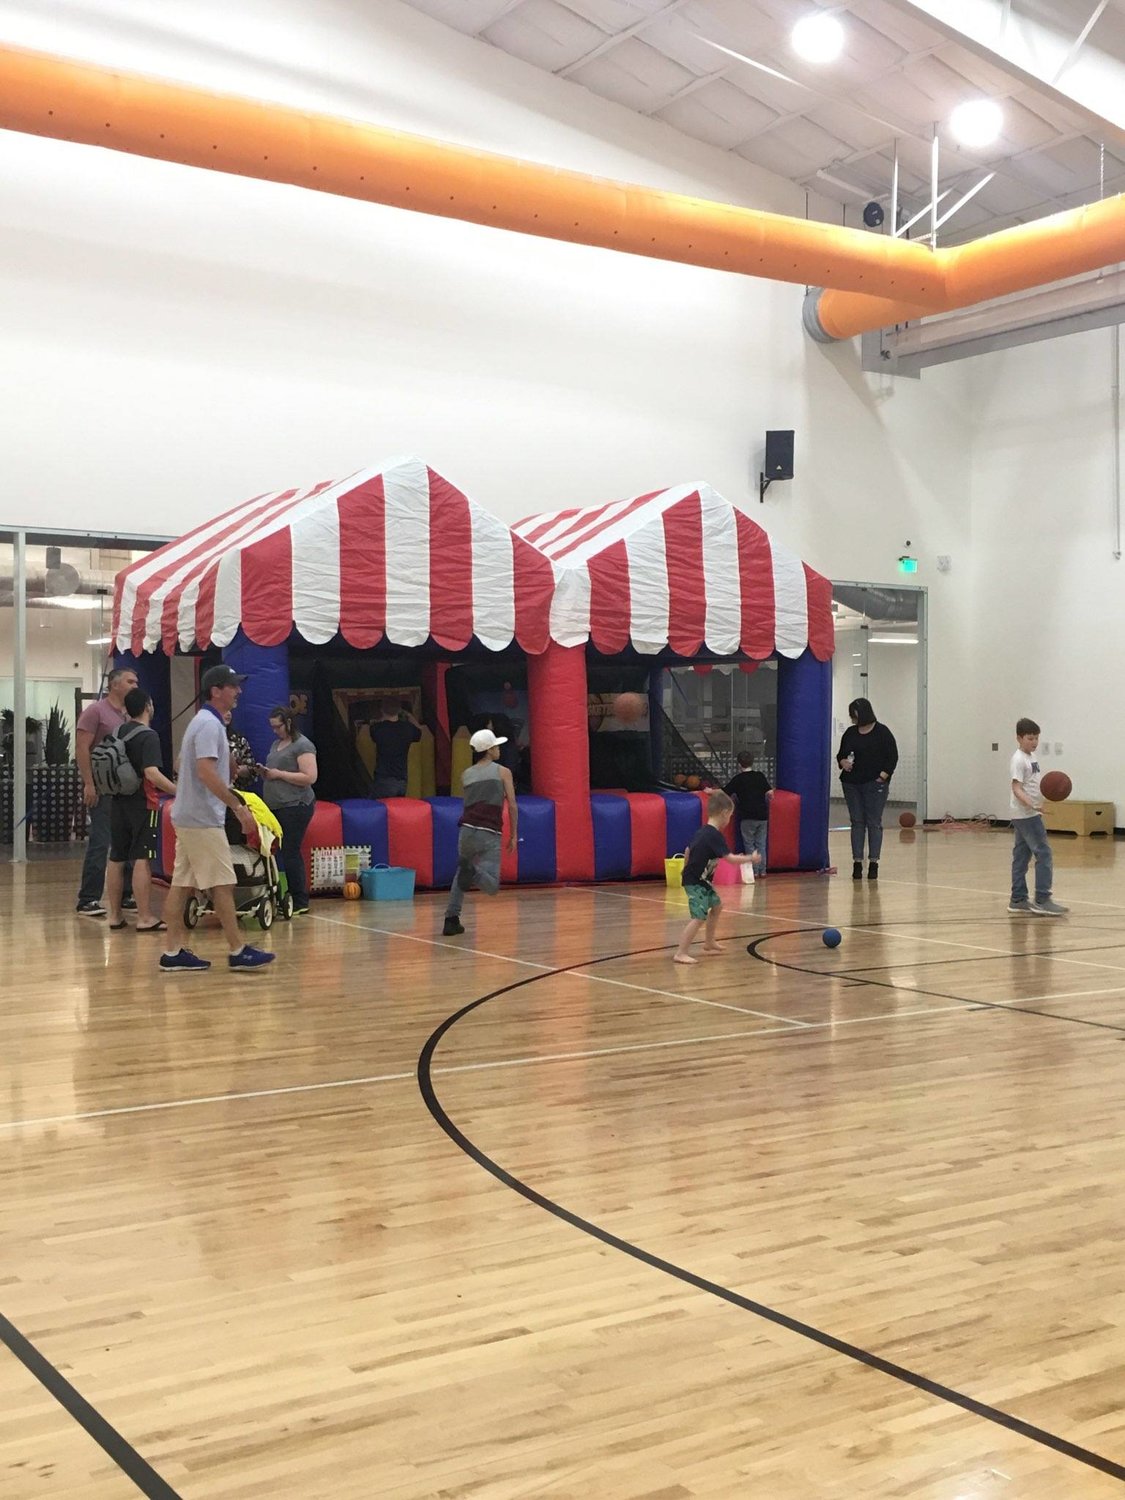 Gonzales Healthcare Systems employees and their families had loads of fun last Saturday, playing games and jumping on inflatables.